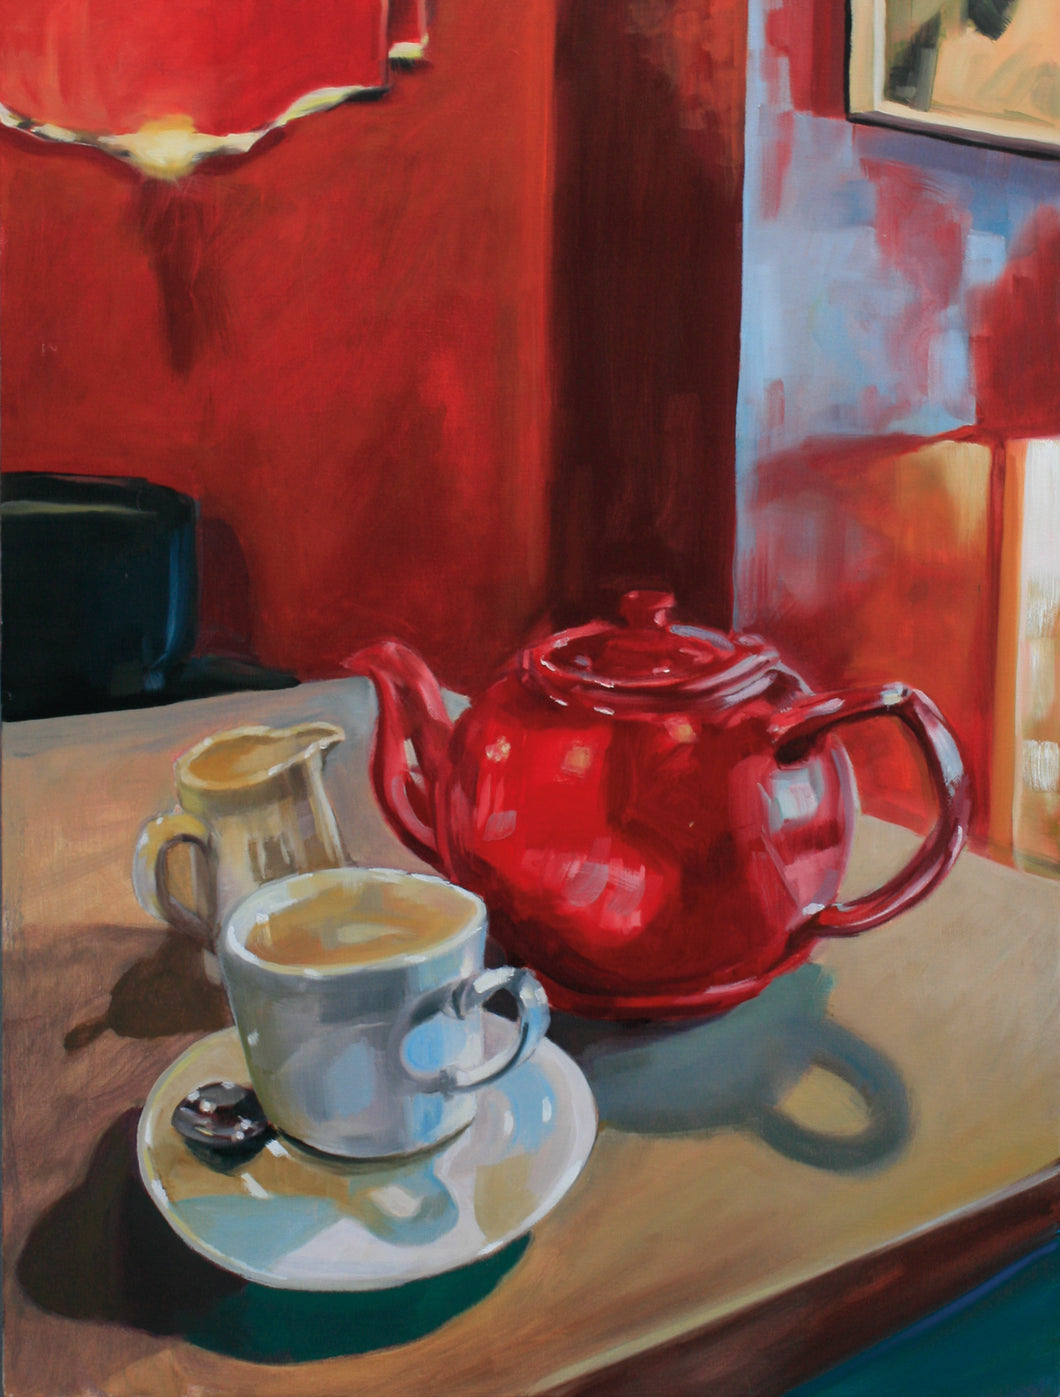 The Red Teapot